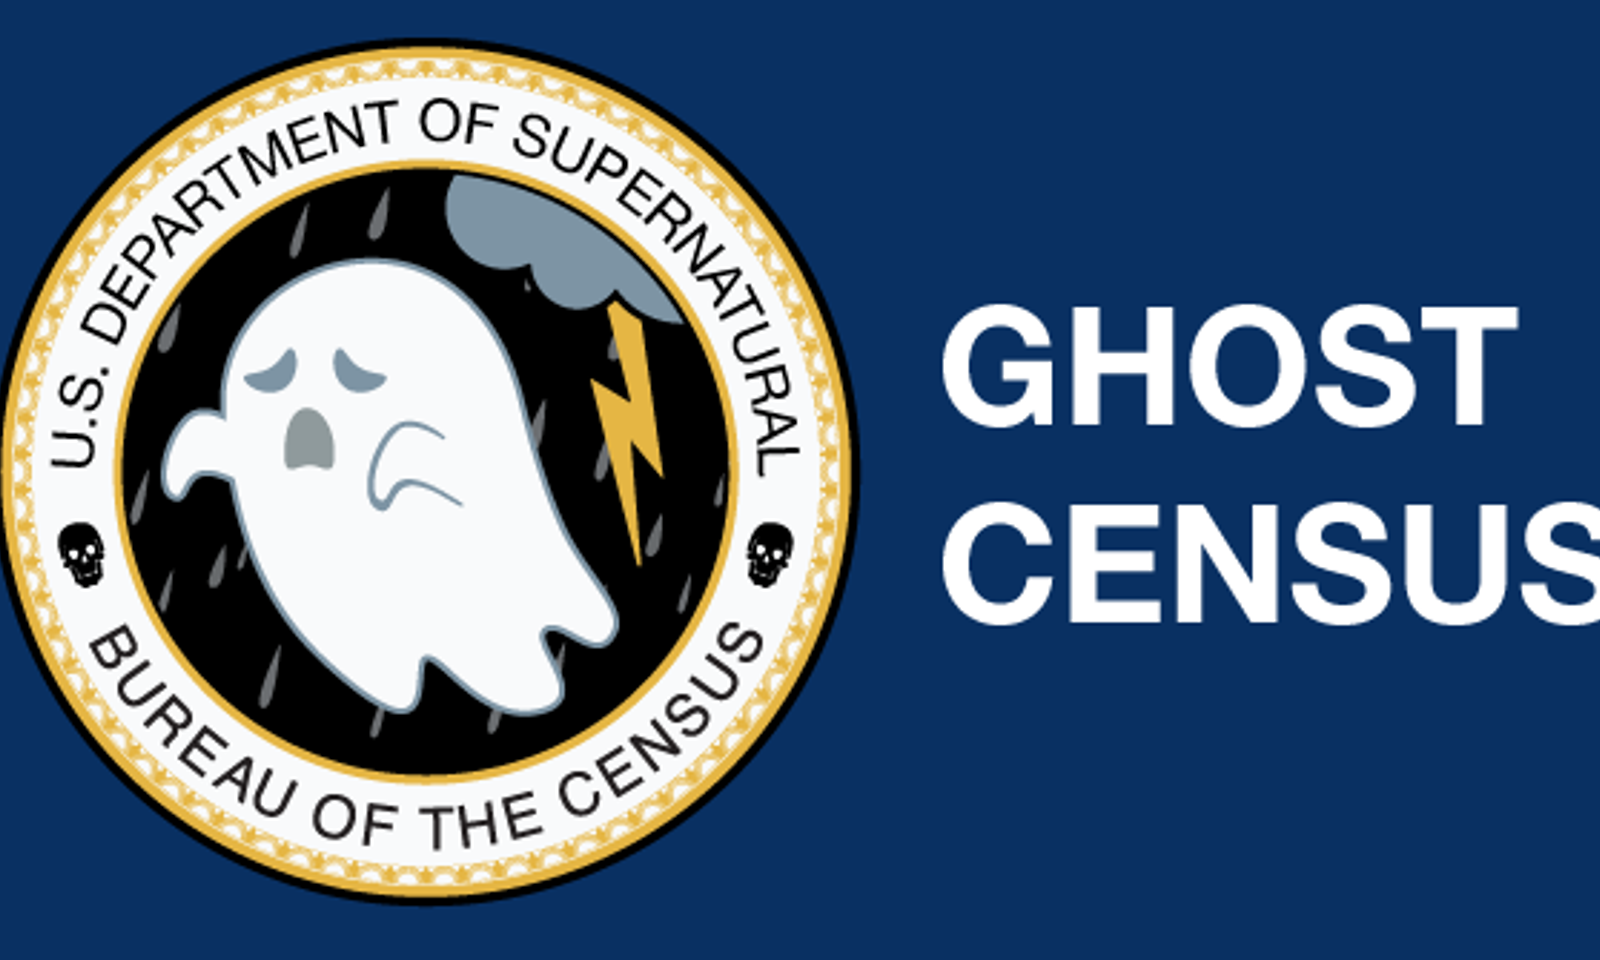 U.S. Department of Supernatural Bureau of The Census governmental seal with a ghost in a thunderstorm